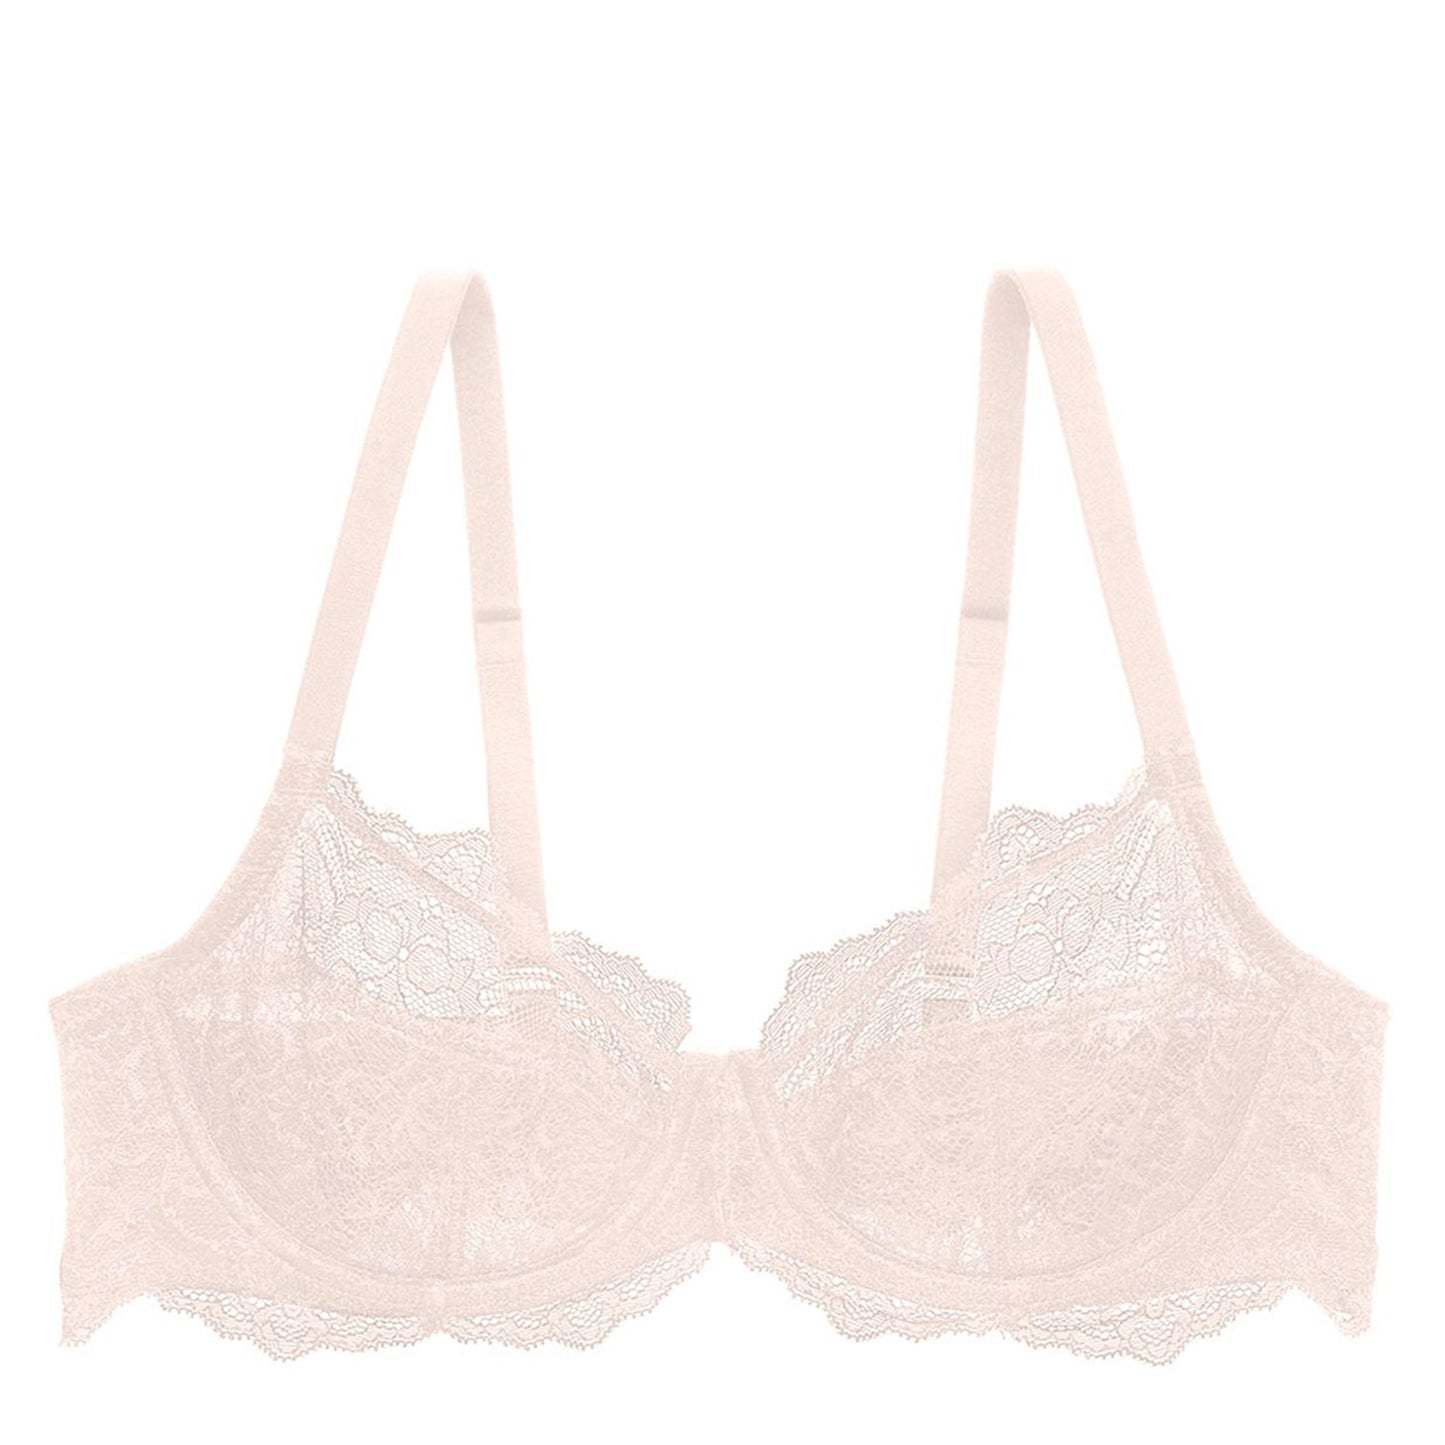 Lightly Lined Demi Cotton Bra - Pink mix